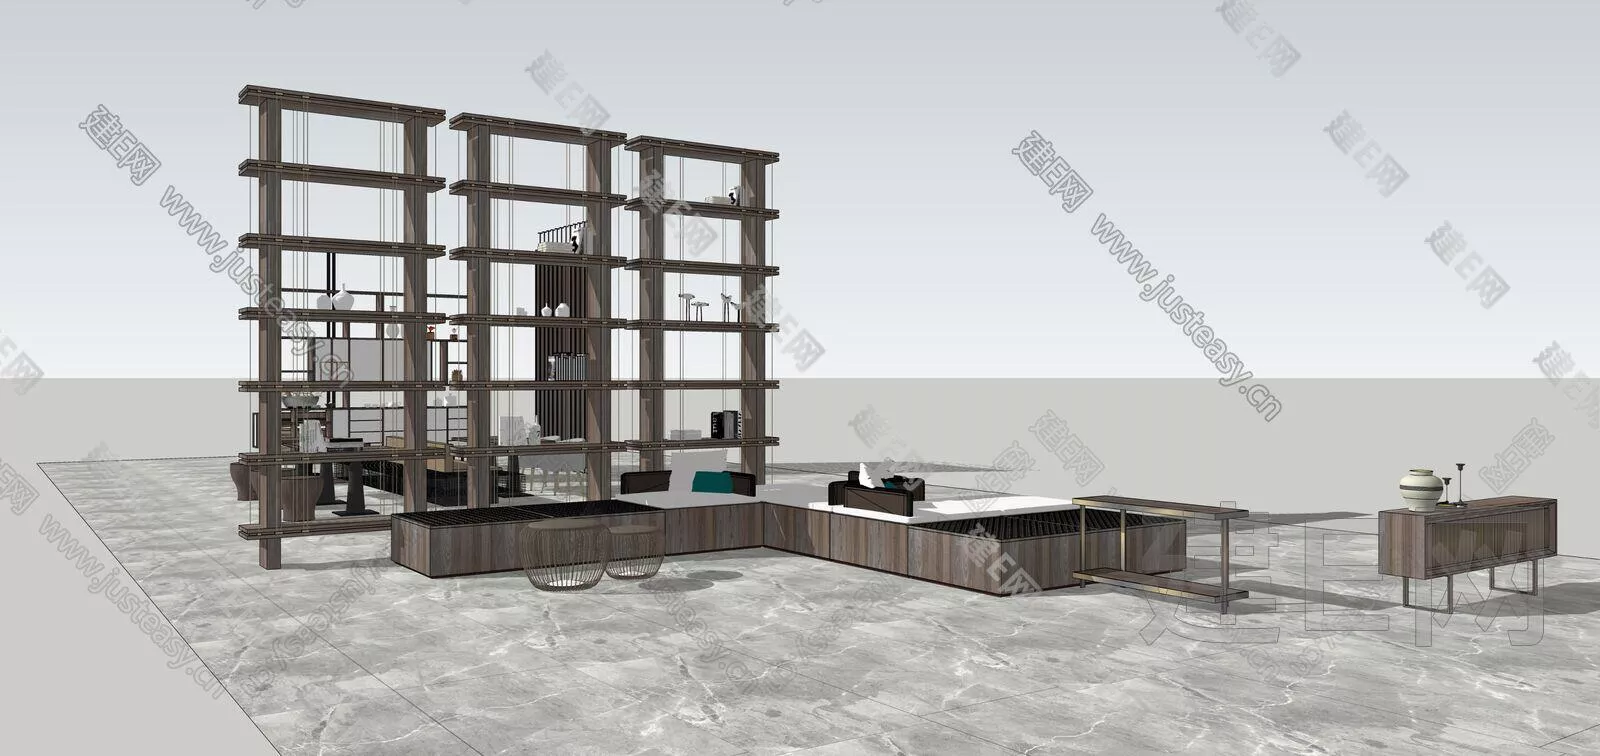 CHINESE DINING TABLE SET - SKETCHUP 3D MODEL - ENSCAPE - 113197442